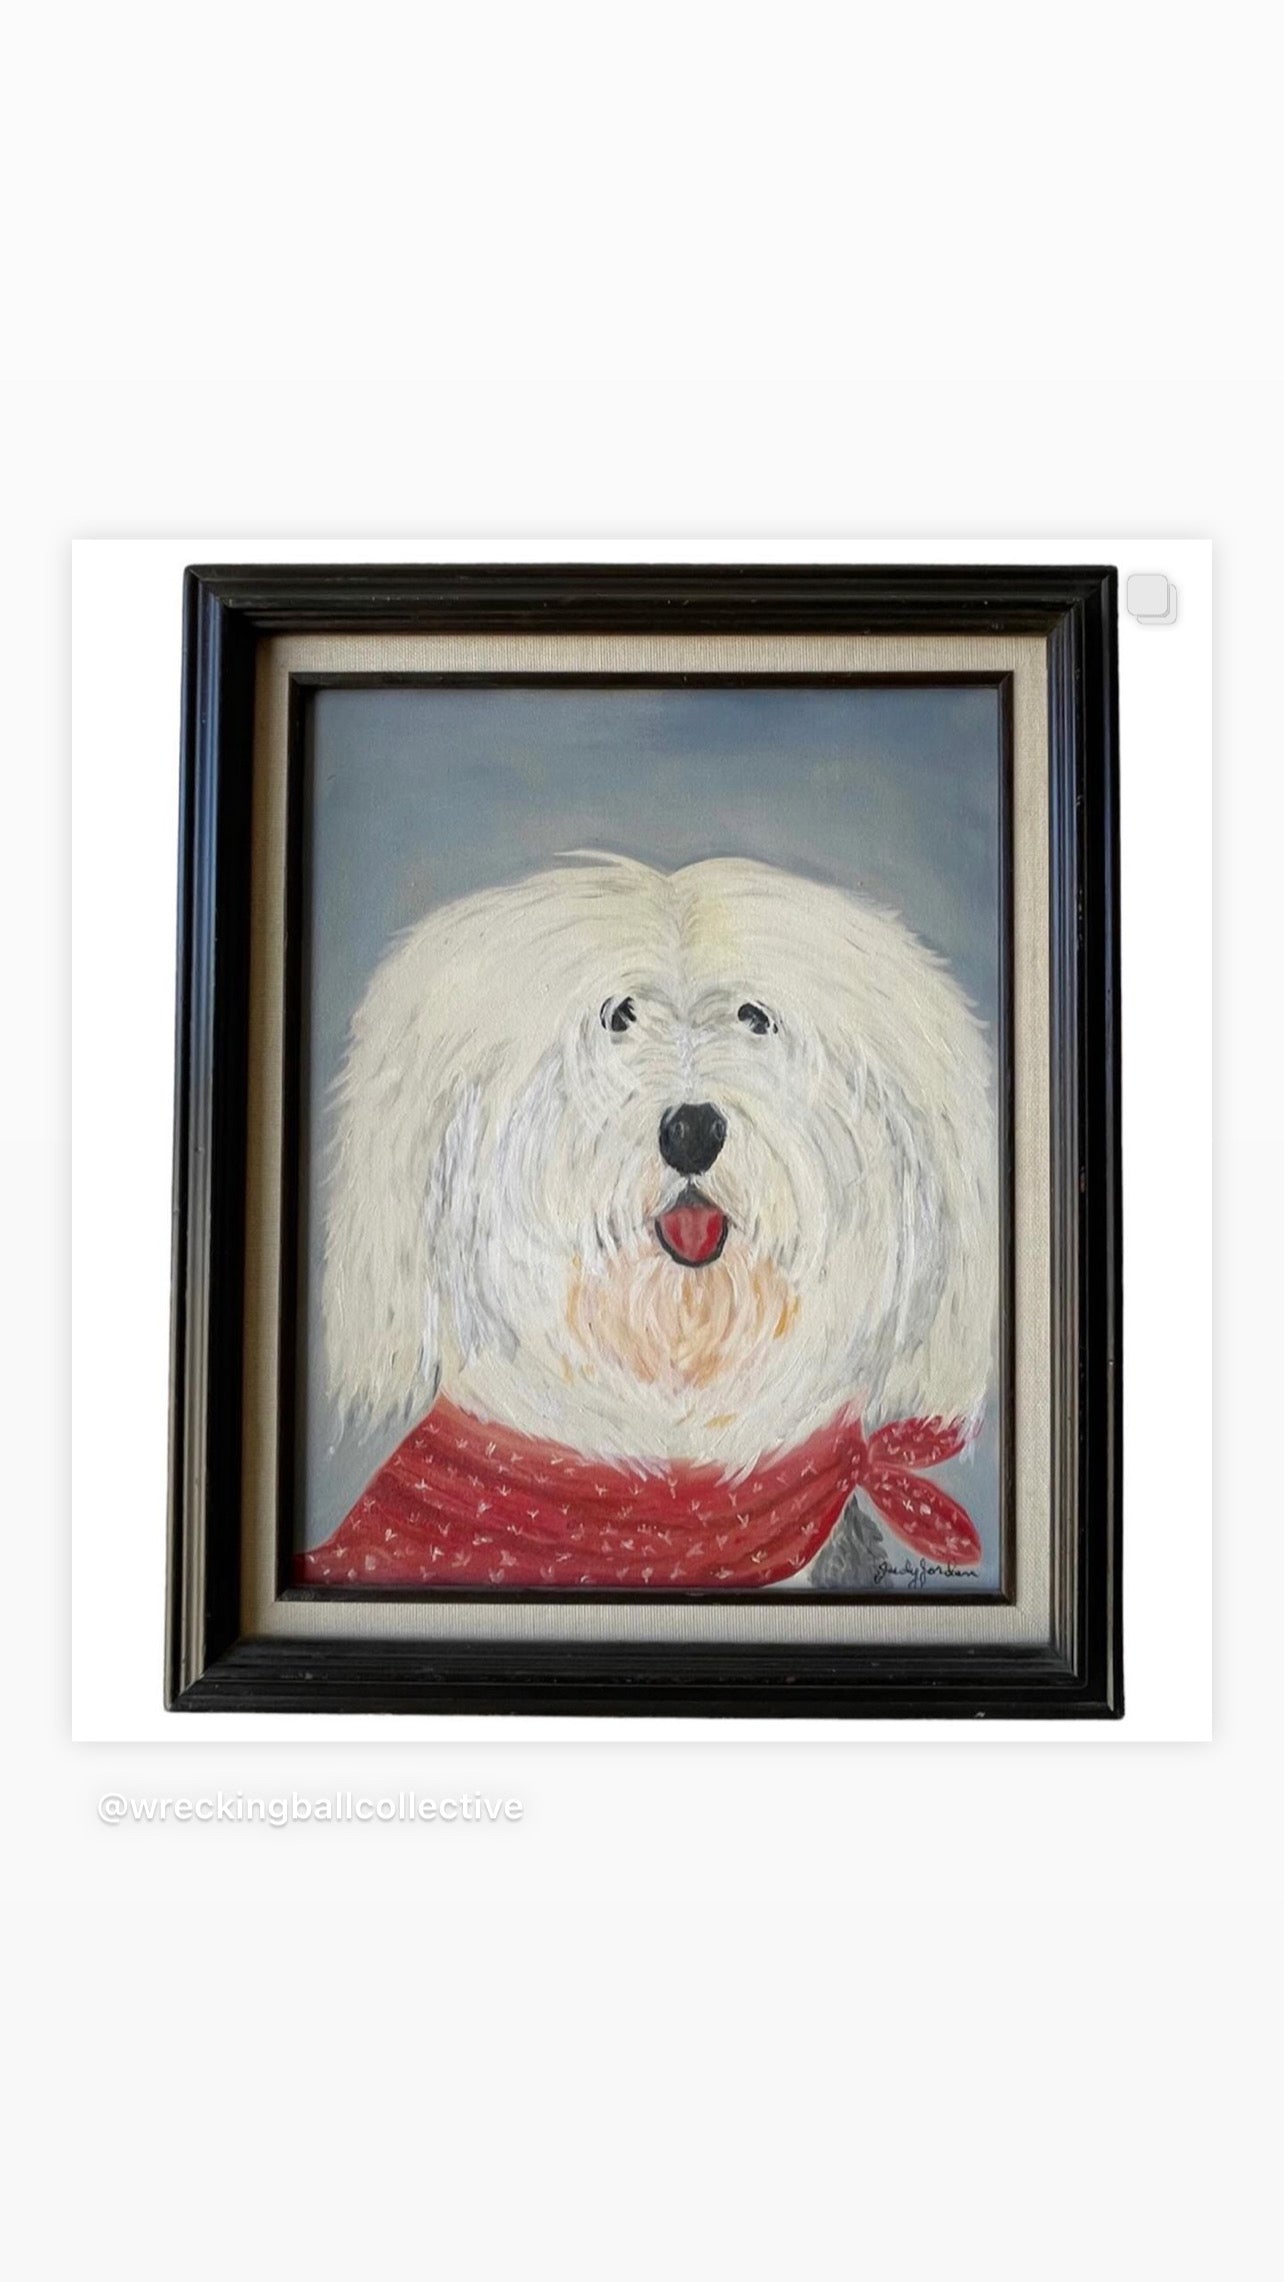 Vintage 1981 - White Dog with Bandanna - Oil on Board